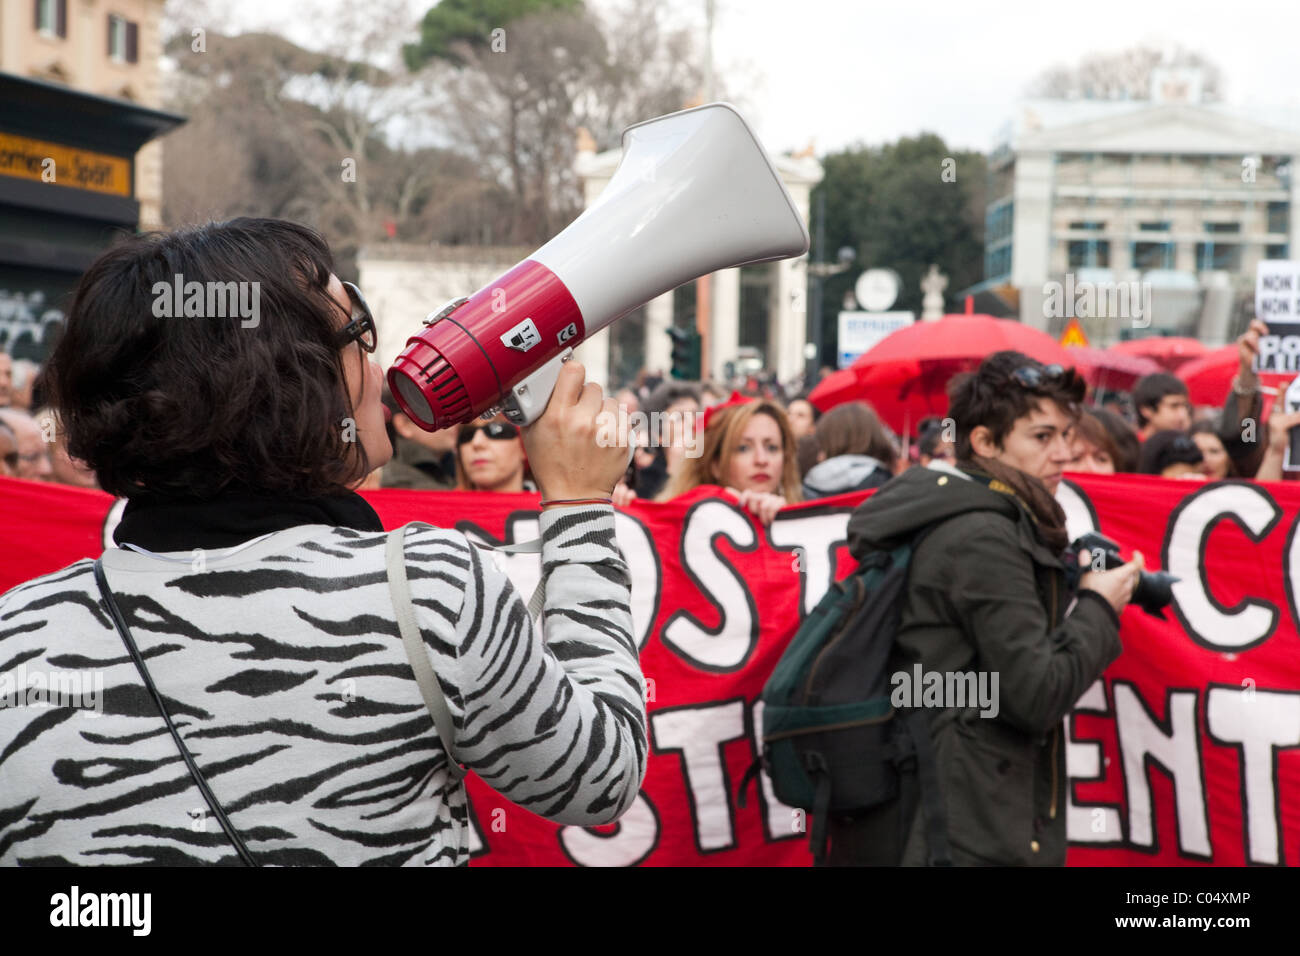 women rally protest protesters Italy Stock Photo